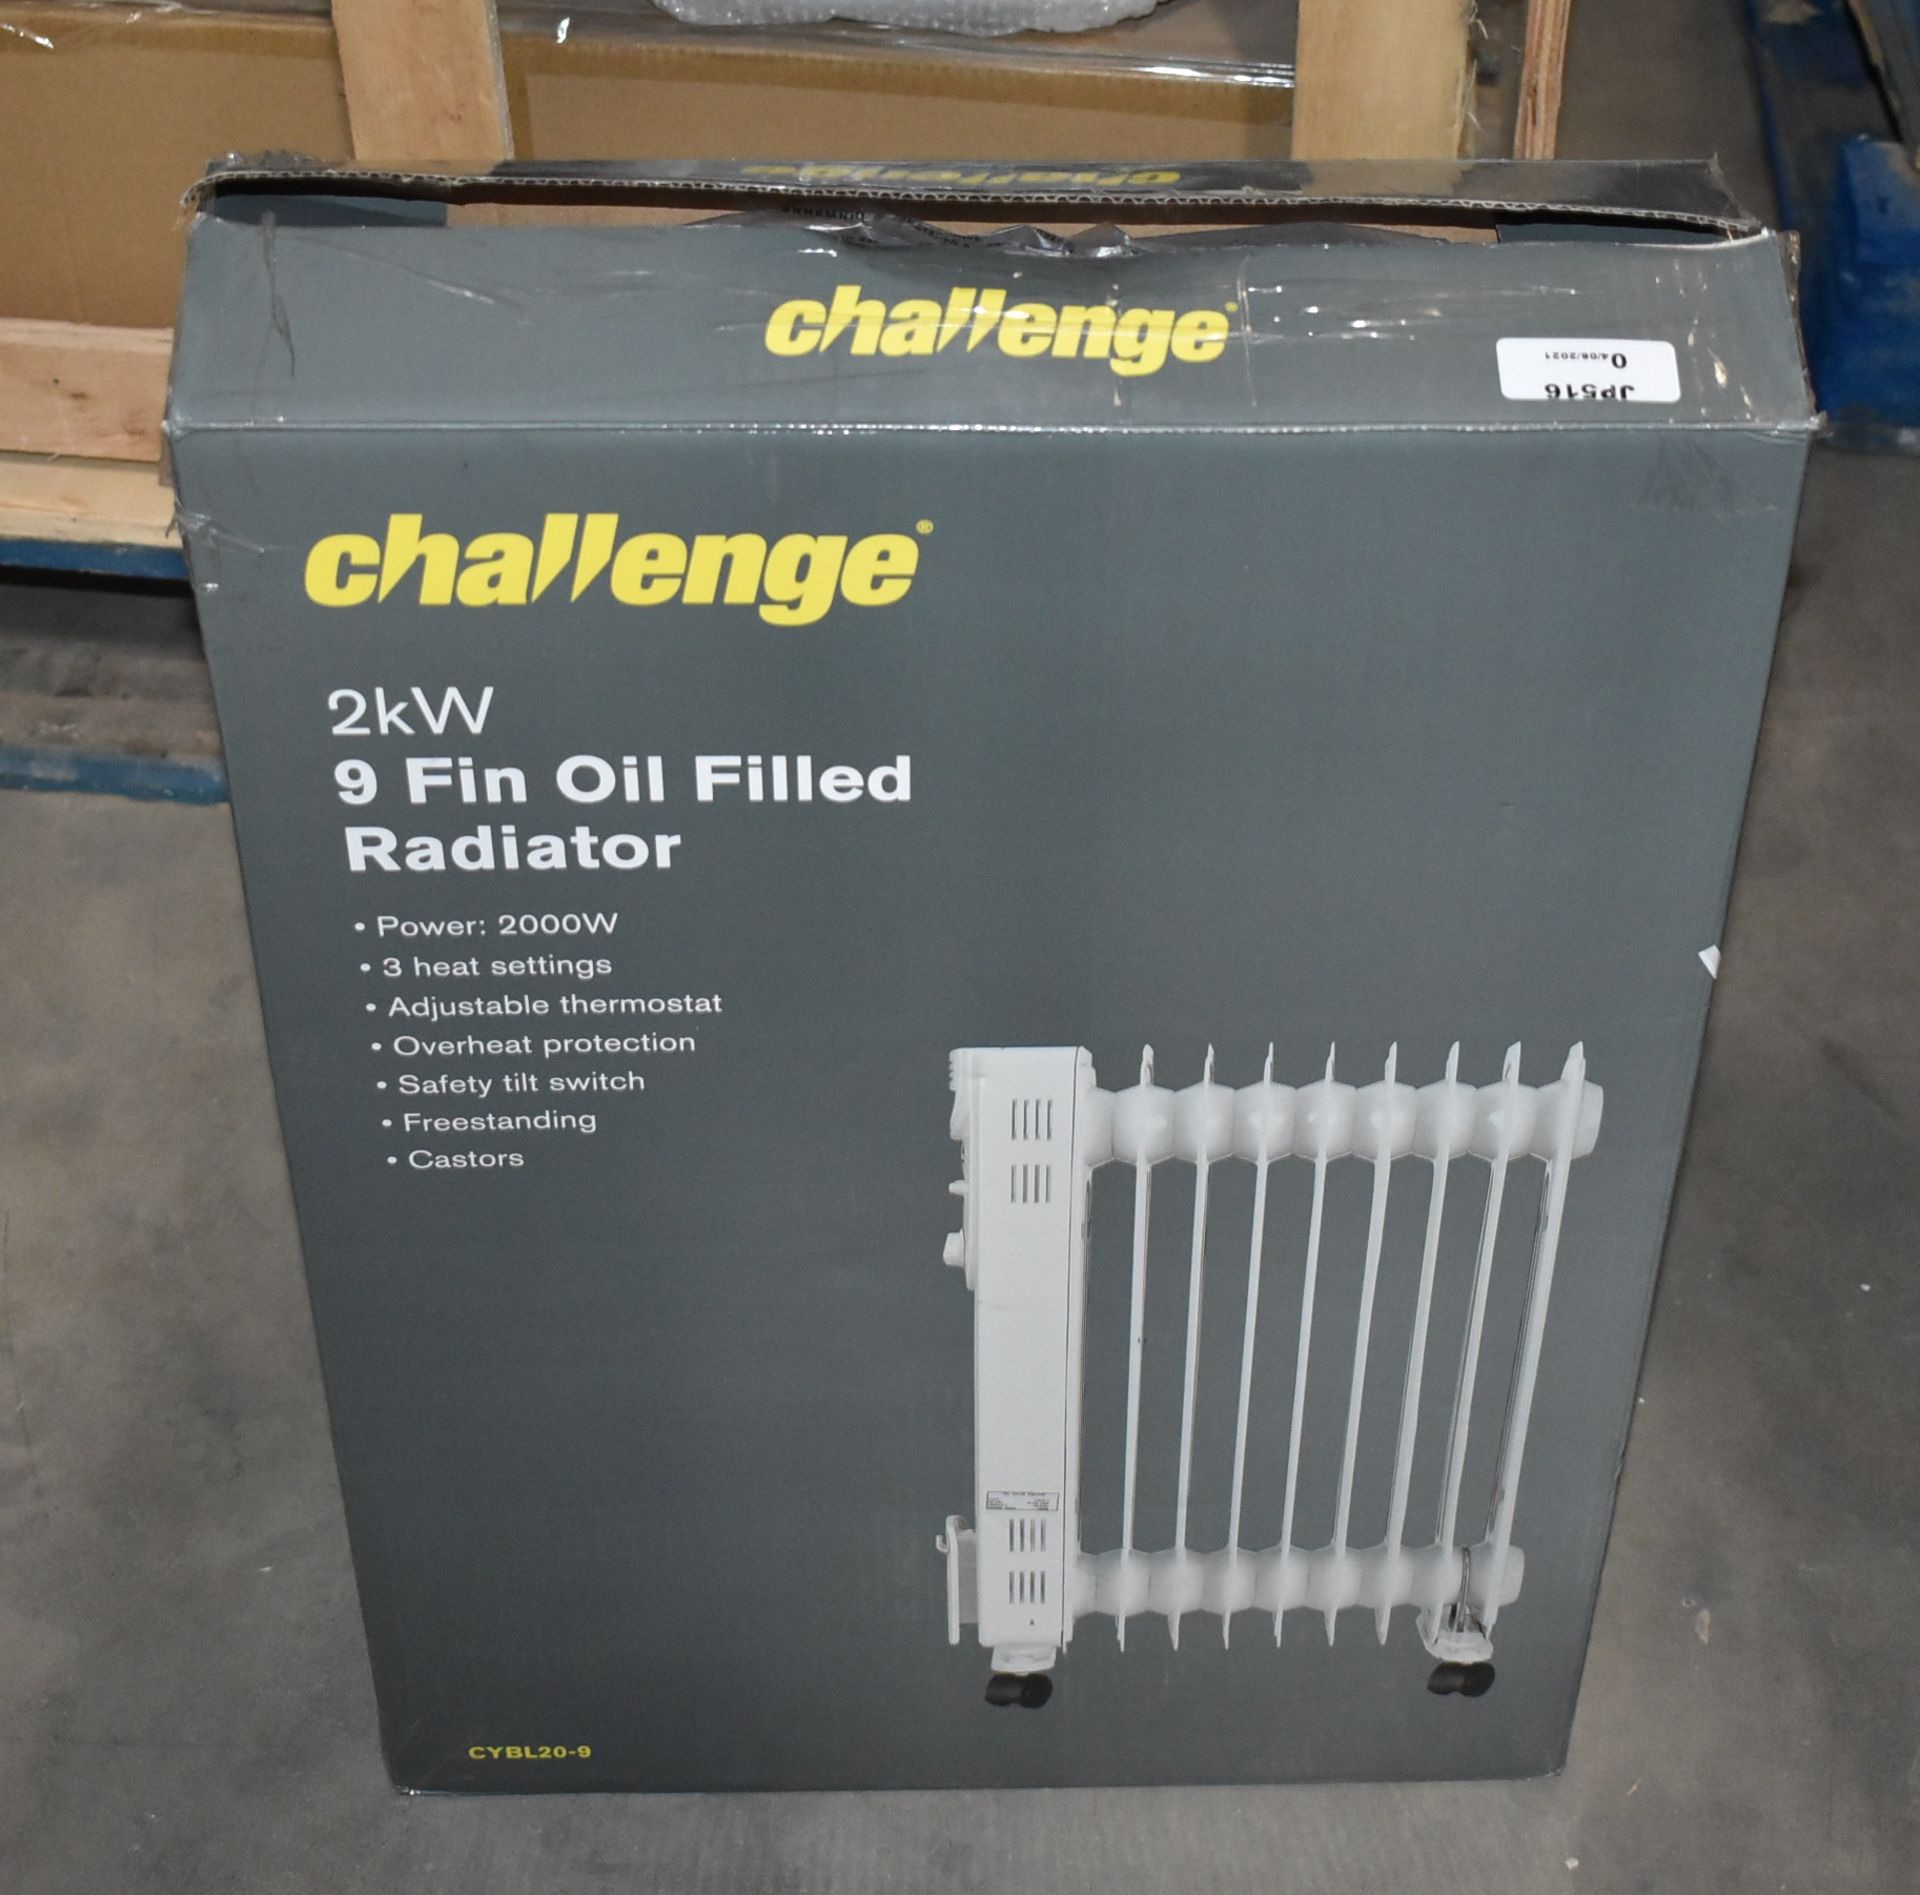 1 x Challenge 2kW 9 Fin Oil Filled Radiator With Three Heat Settings - Ref JP516 WH2 - NO VAT ON THE